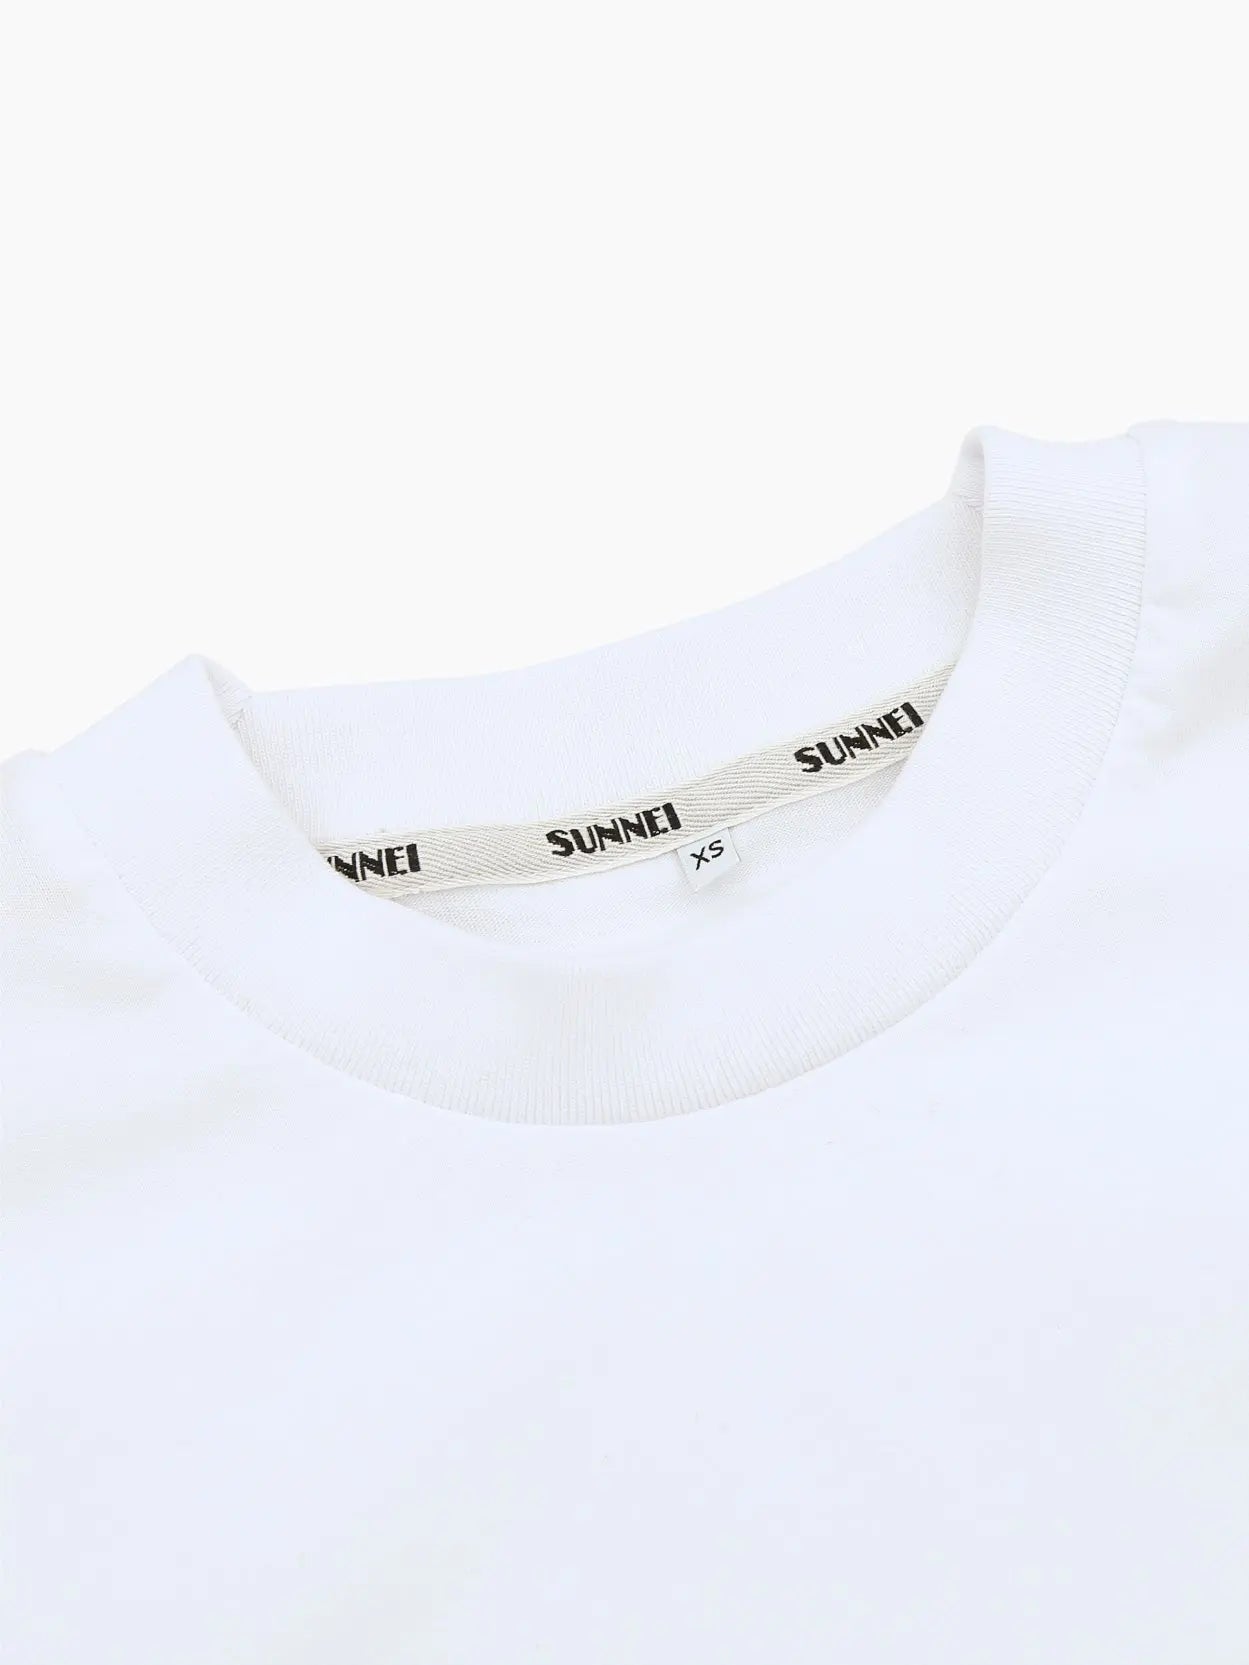 A white t-shirt with the text "JADOREREI SUNNEI" printed in black on the chest. The shirt has a classic crew neck and short sleeves, with a clean and minimalistic design, available exclusively at our Barcelona store, Bassalstore. 
Product Name: J'Adorerei Sunnei T-Shirt Re-Edition 
Brand Name: Sunnei